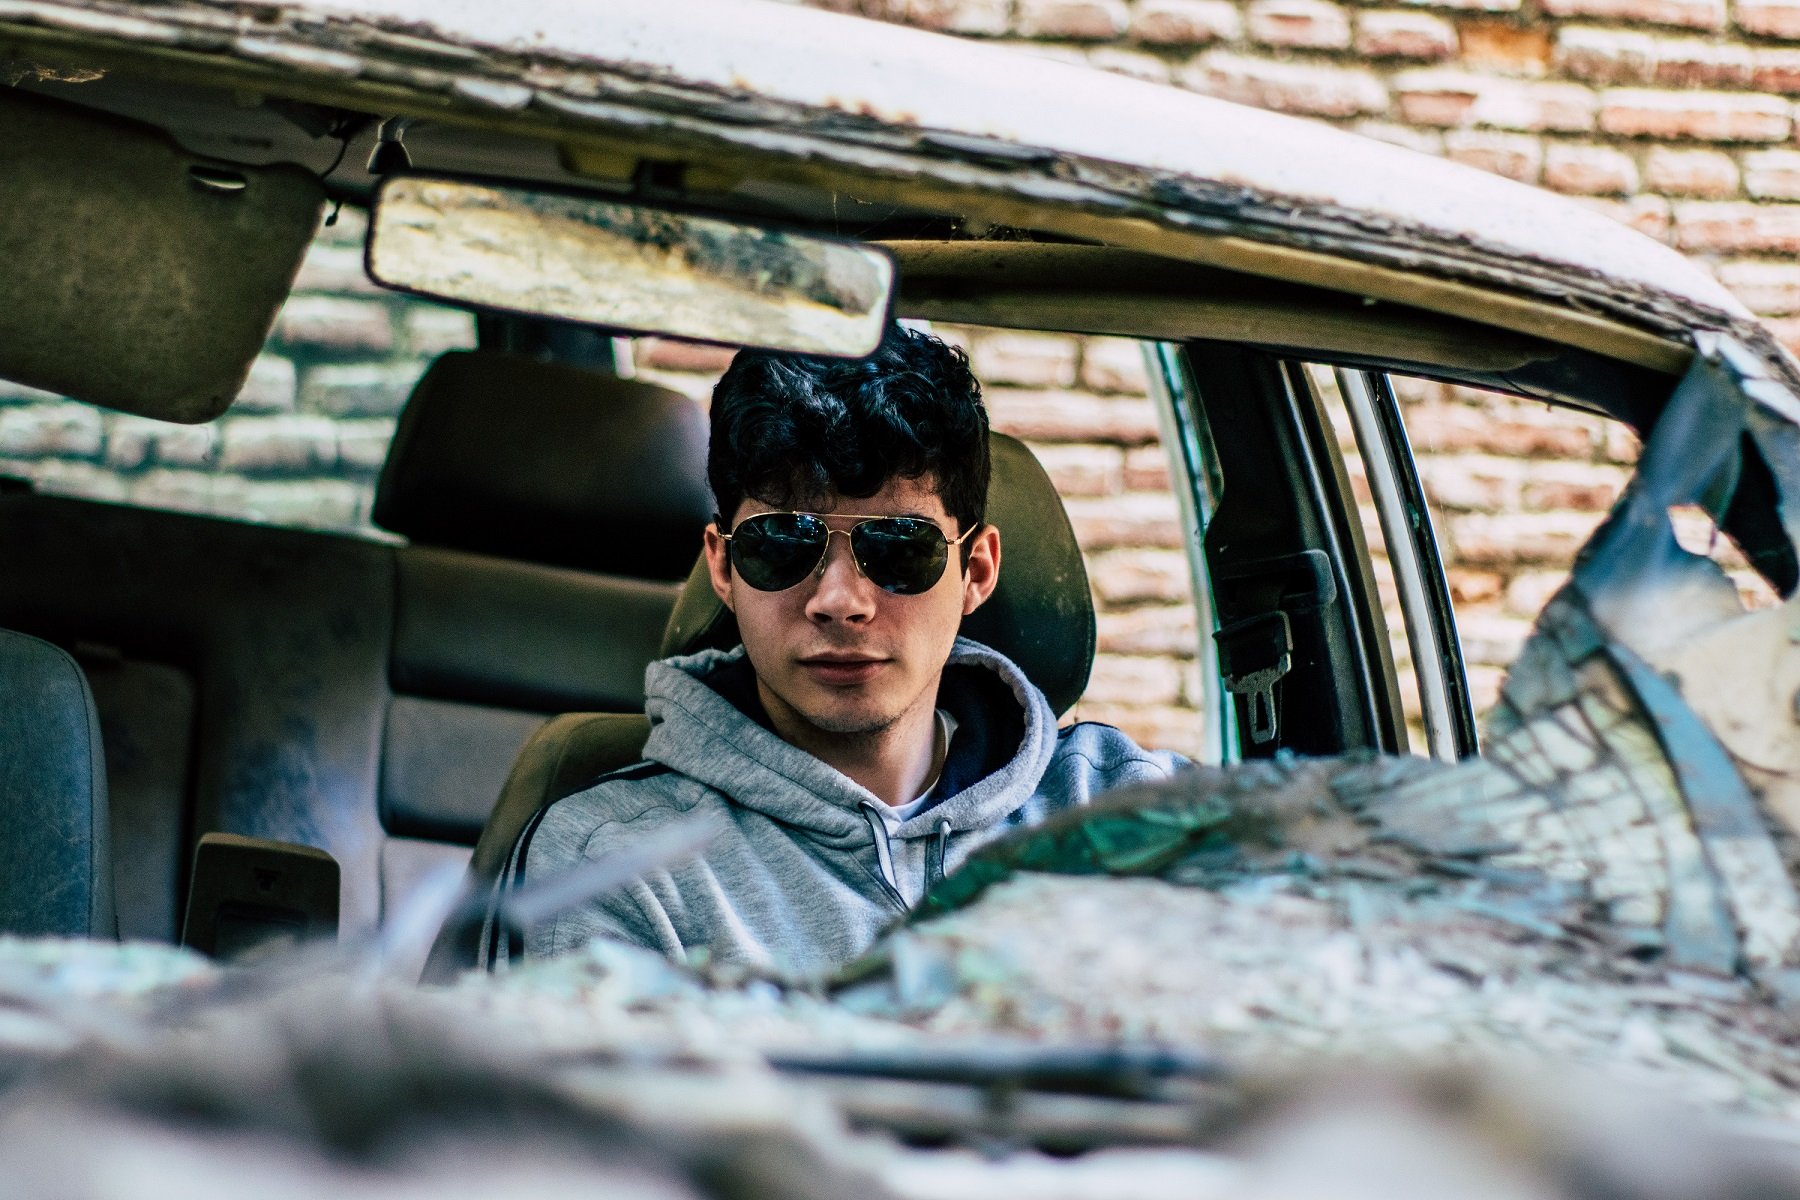 Boy in car with a smashed windshield and ruined interior fabric